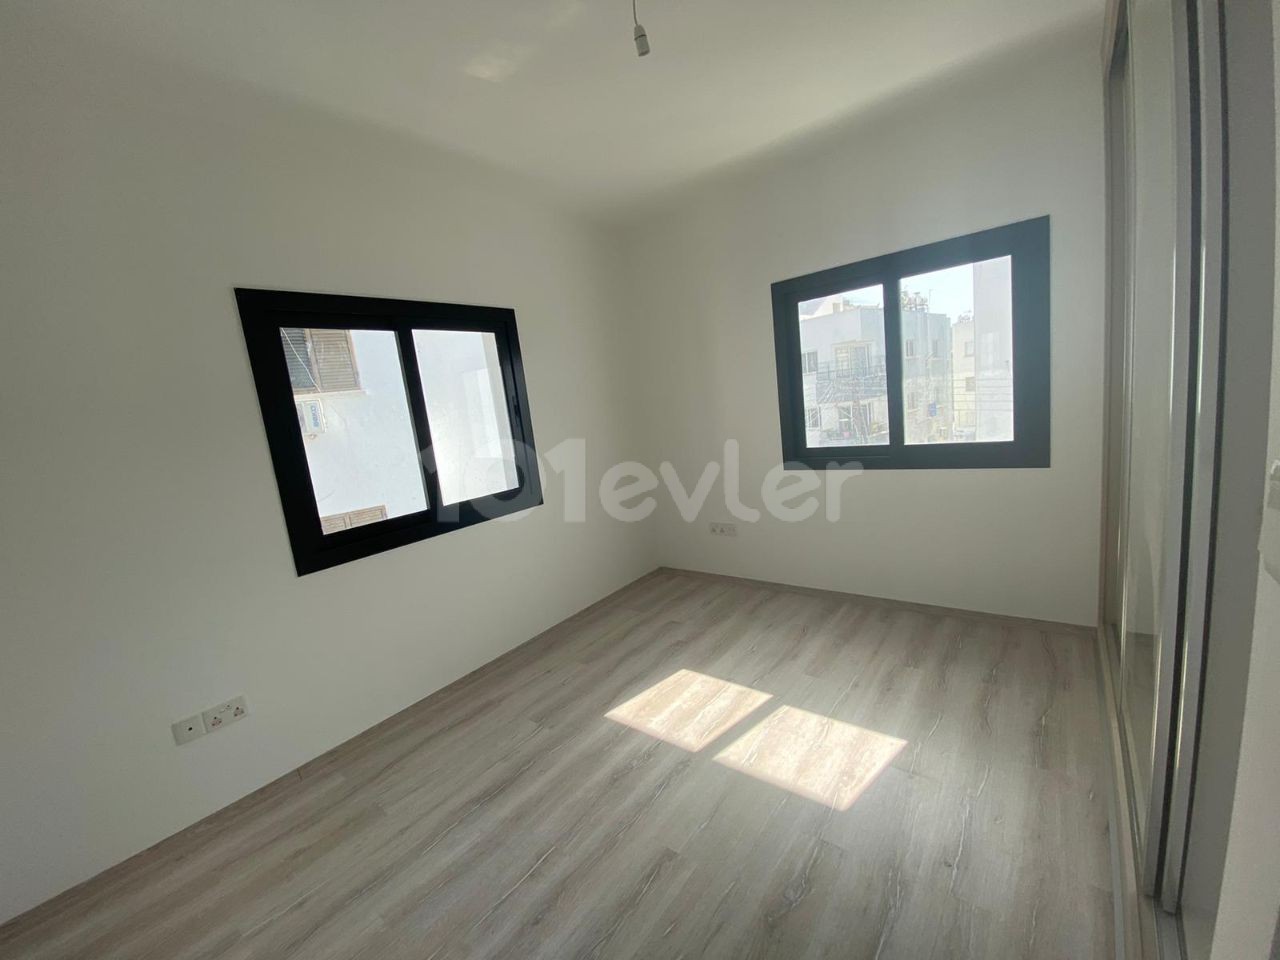 3+ 1 Apartment Of 128 m2 And 2+ 1 Penthouse Of 110+16 m2 Terrace For Sale In Ortakoy, Nicosia 78,000 STG ** 